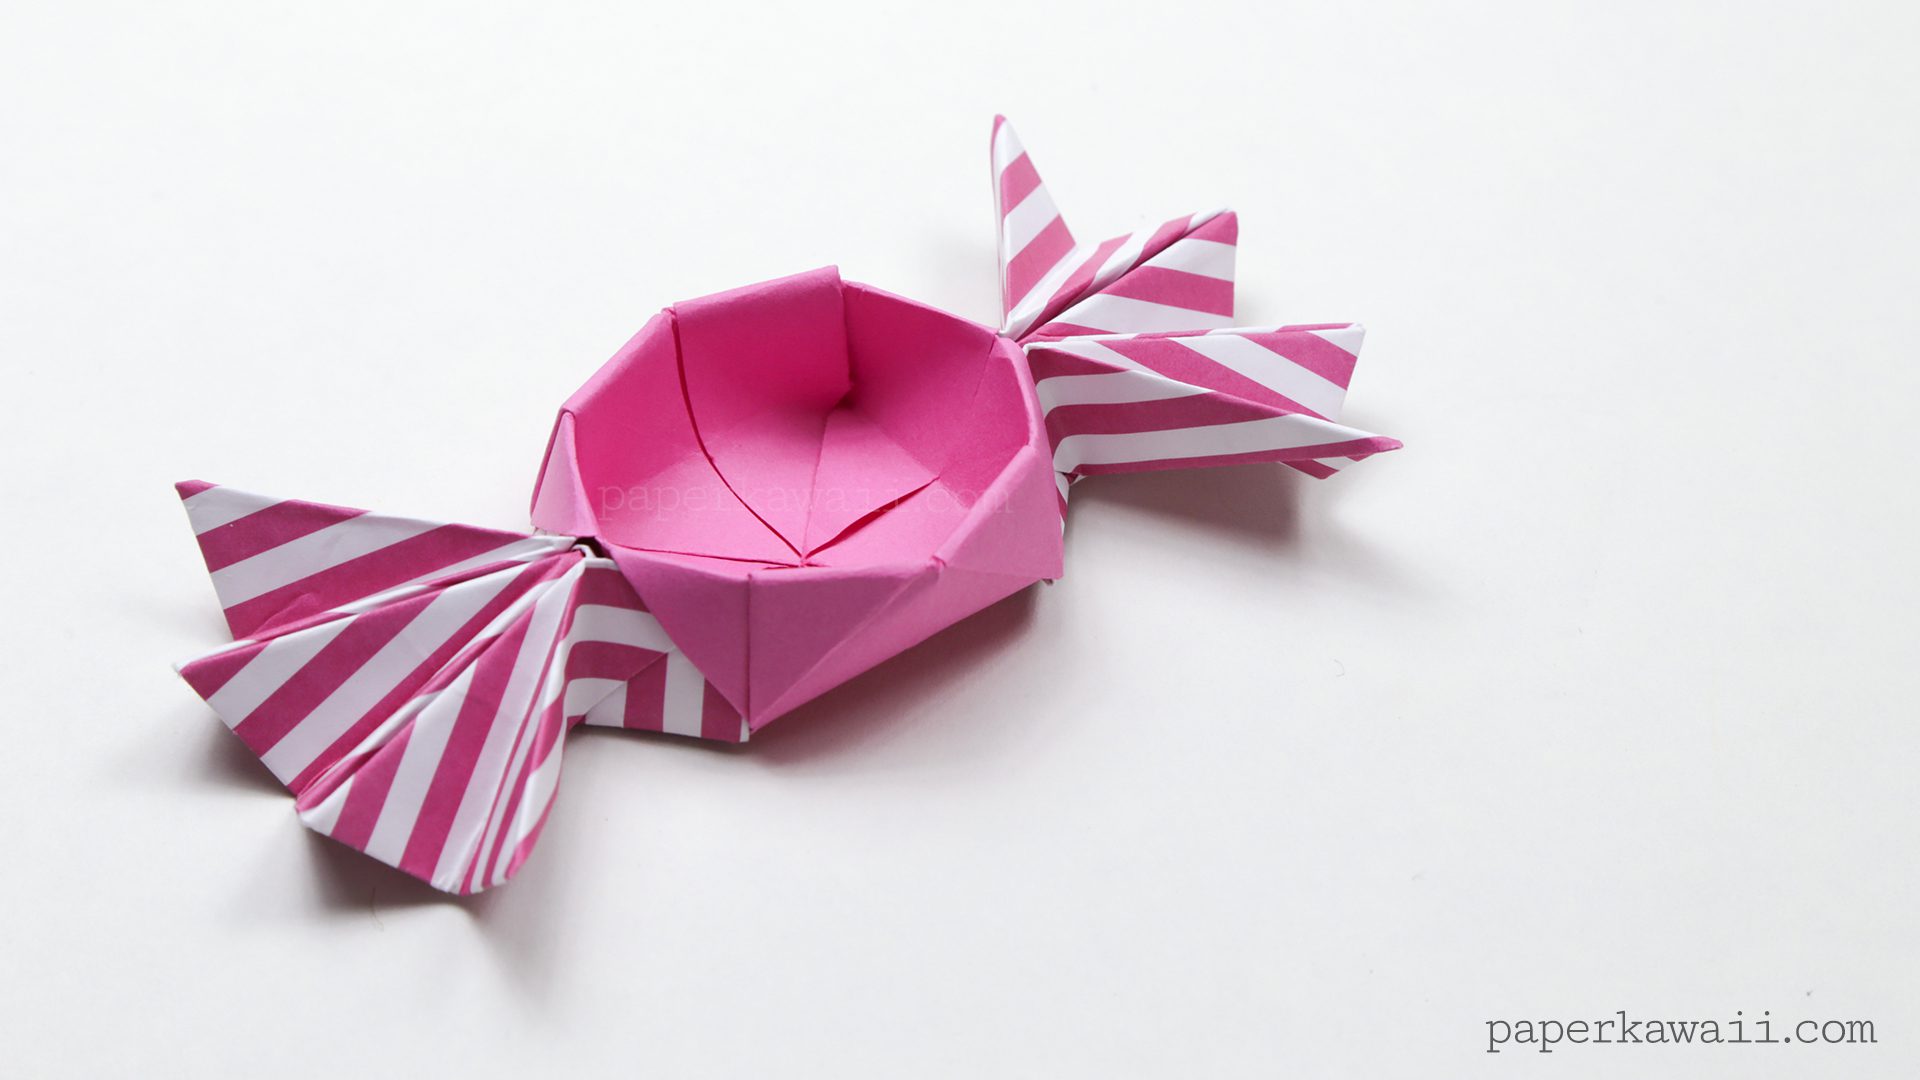 round origami candy box instructions - #diy #crafts #origami #candy